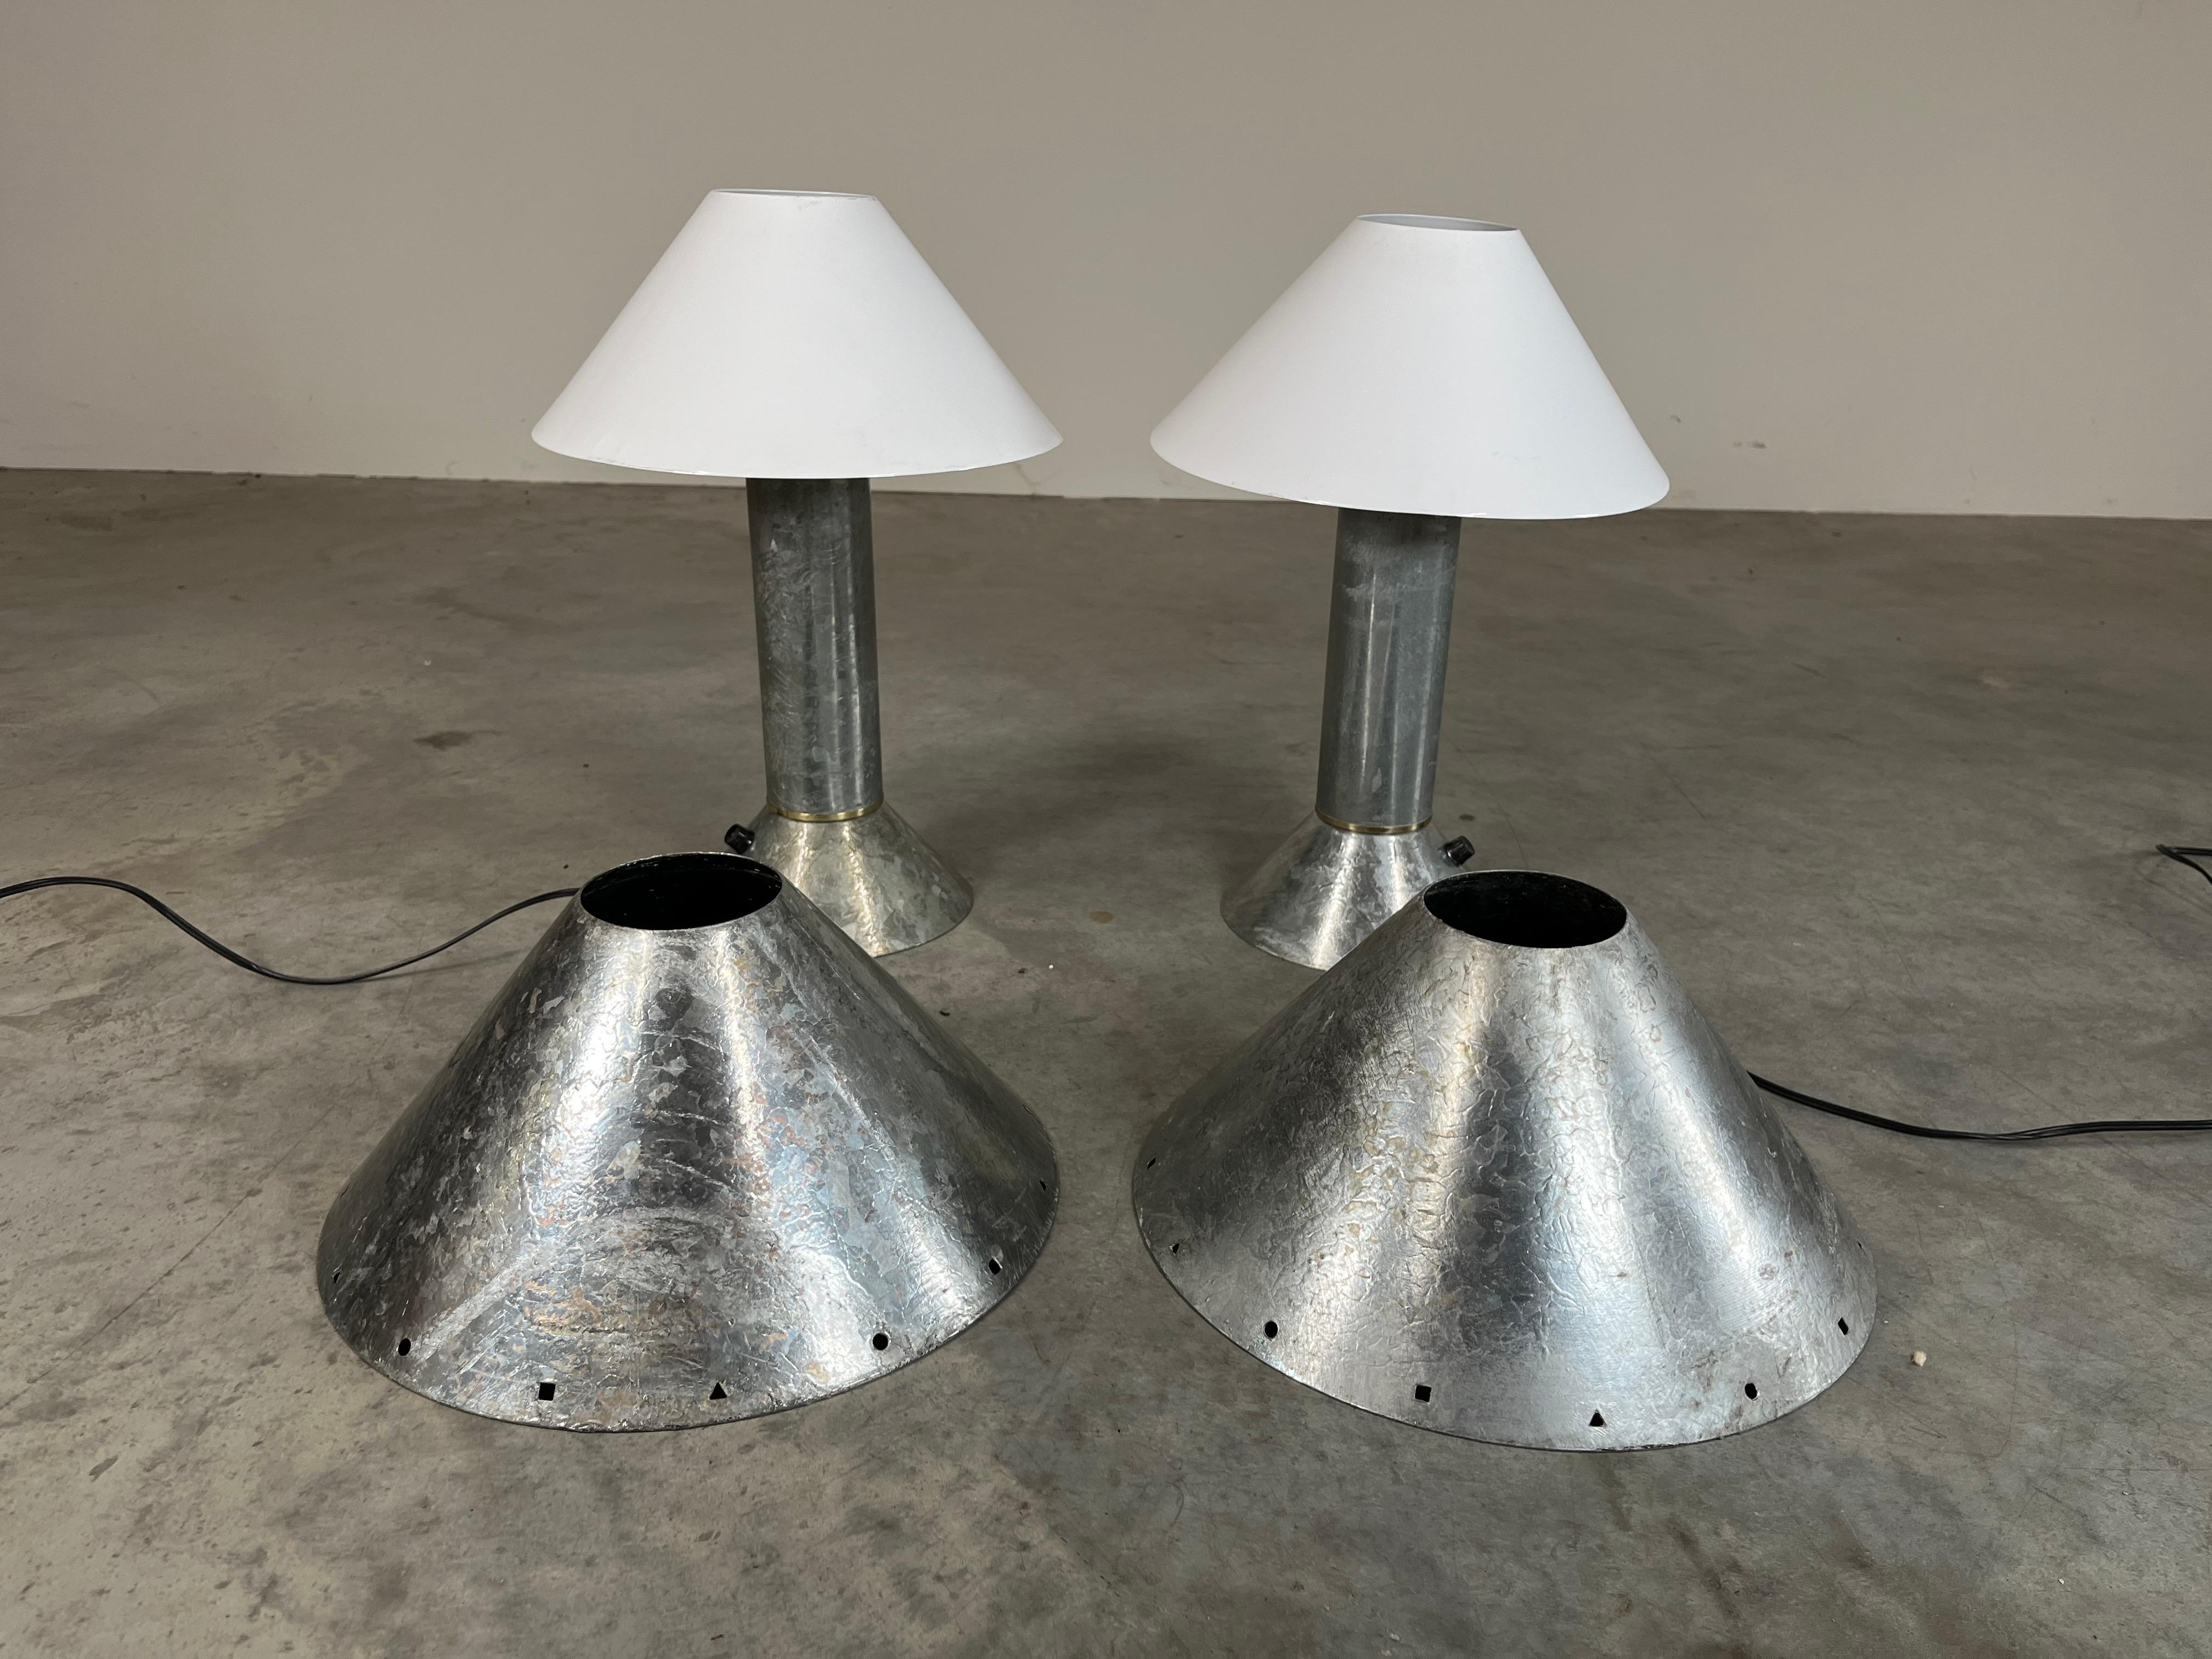 Rare Pair Of Ron Rezek Zinc Plated Modern Industrial Table Lamps Circa 1975 For Sale 2